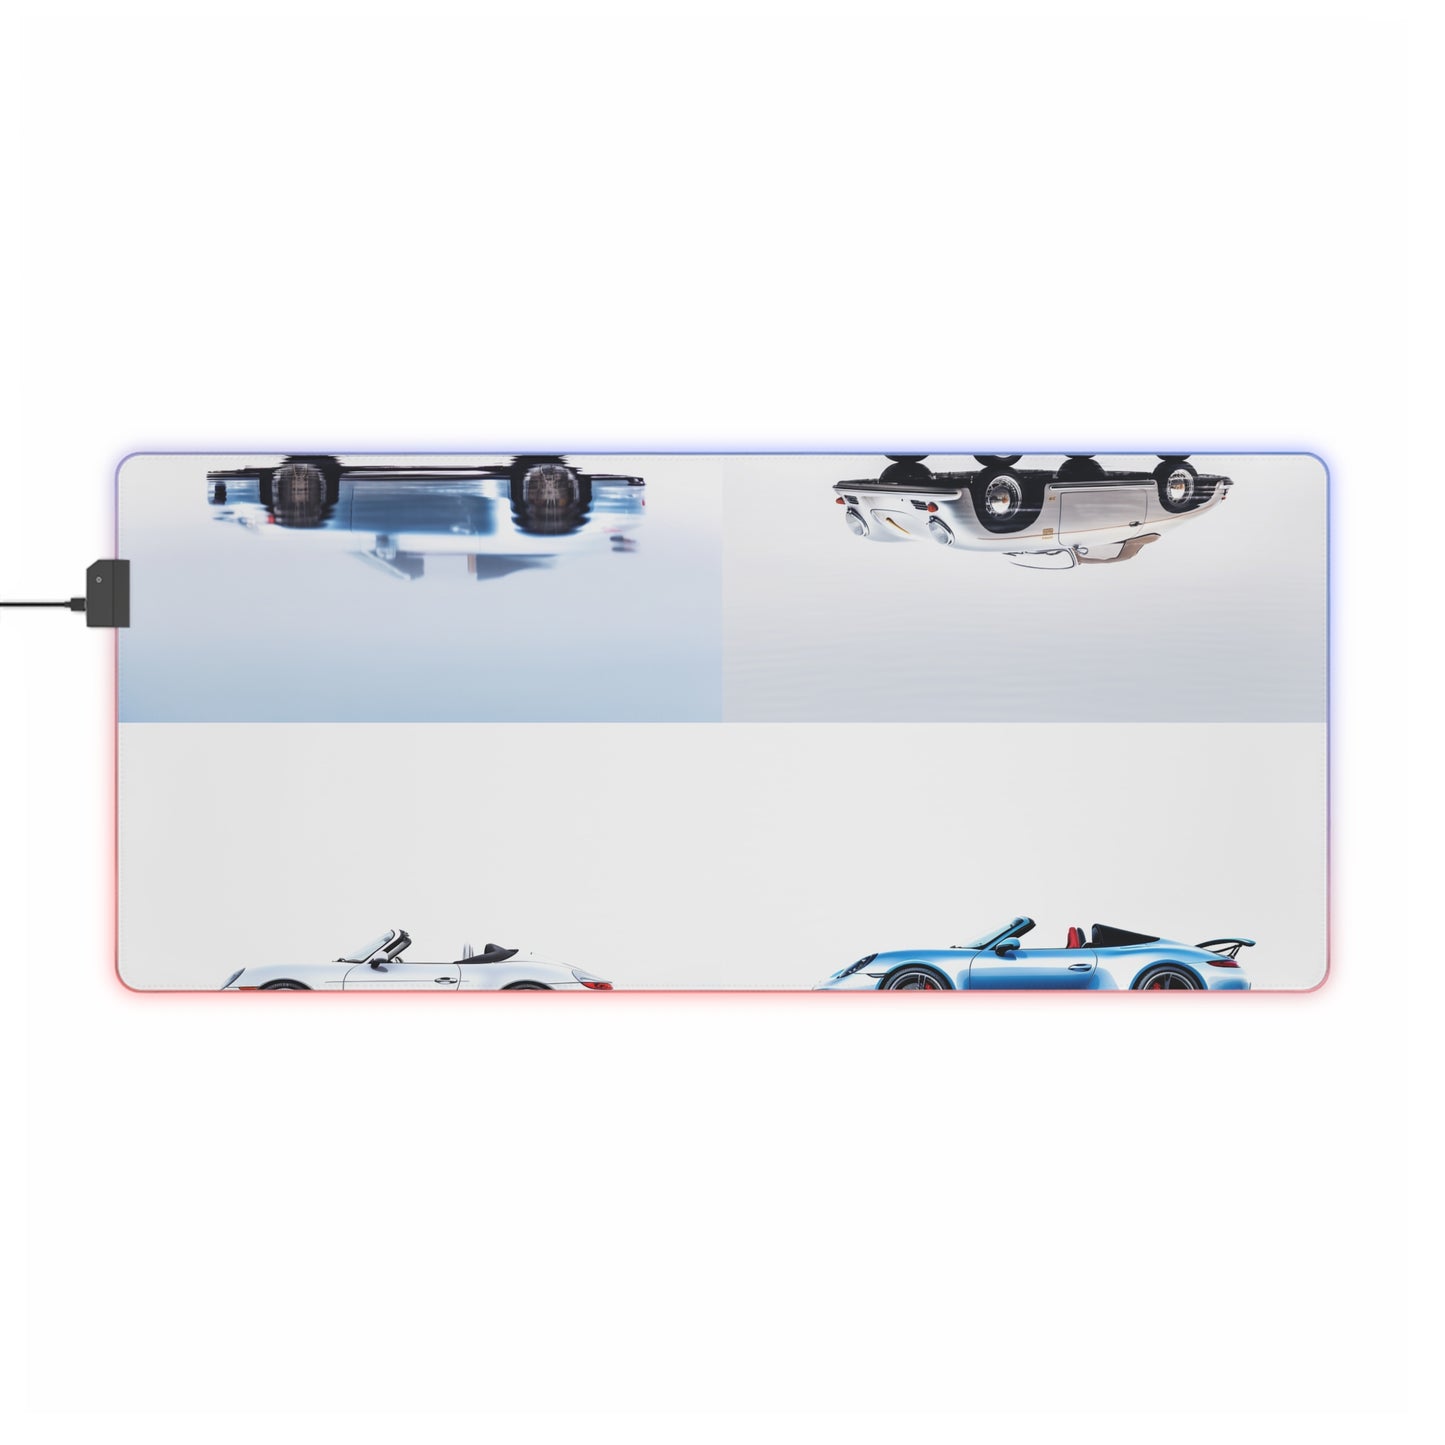 LED Gaming Mouse Pad 911 Speedster on water 5